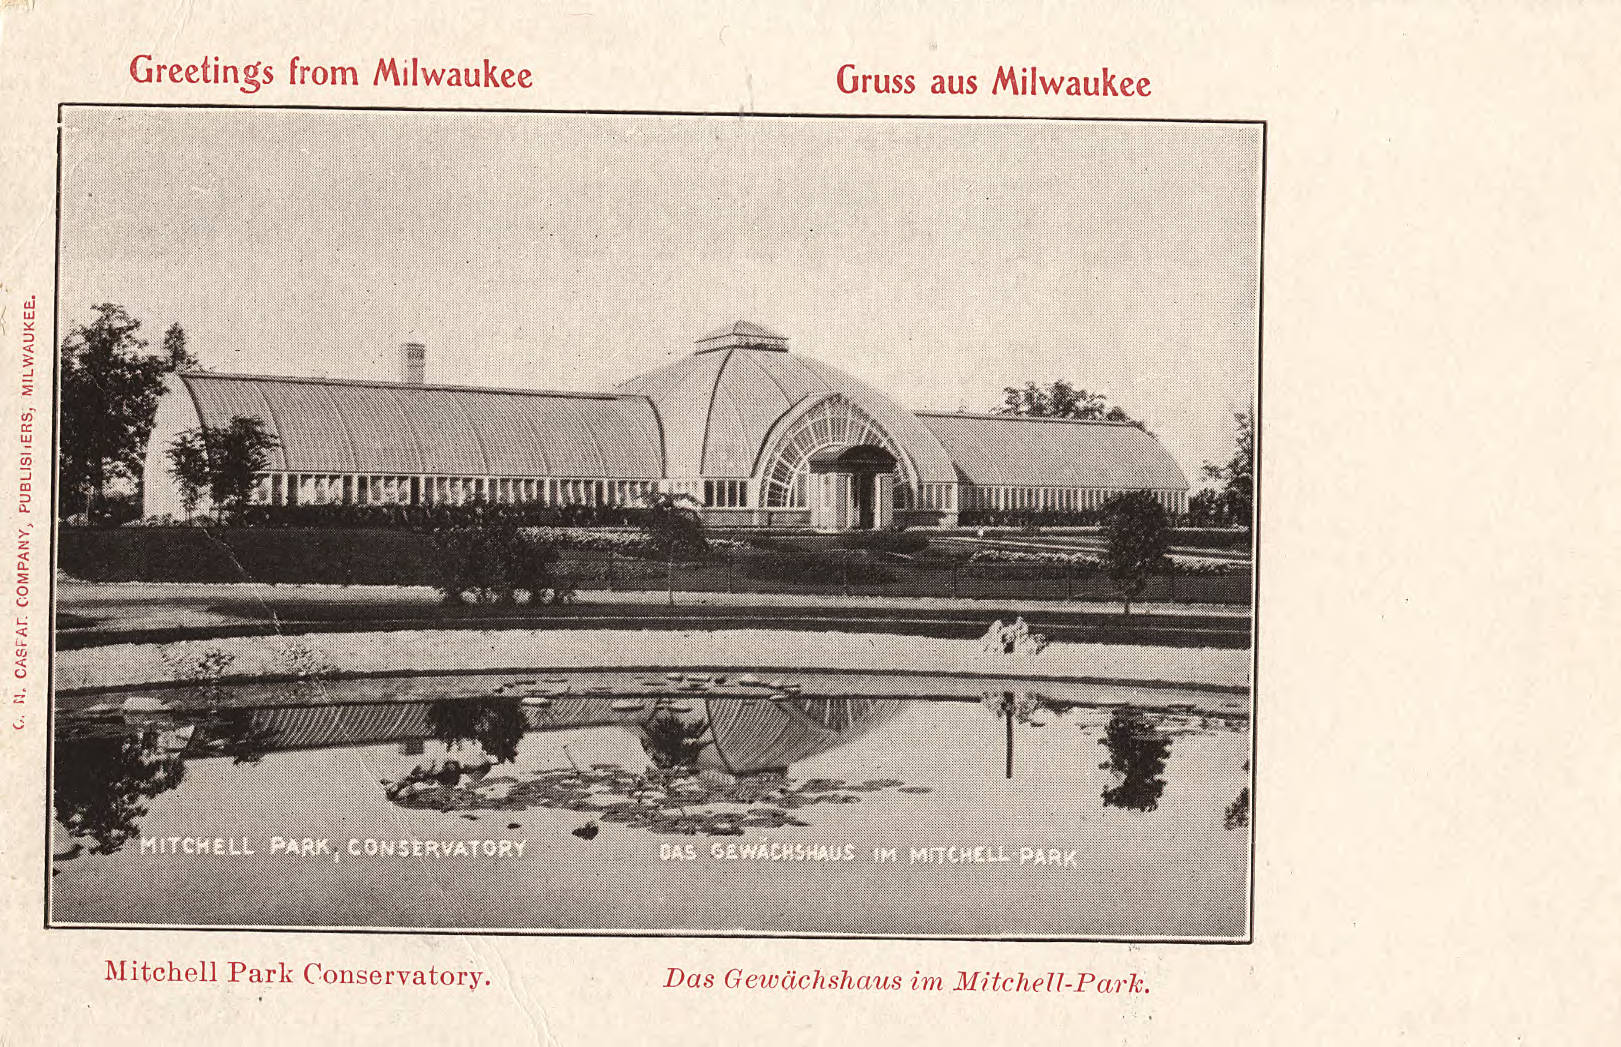 Architect Henry C. Koch drew inspiration for the 1898 Mitchell Park Conservatory design from the Crystal Palace in London. It was replaced by the iconic Domes in 1965.